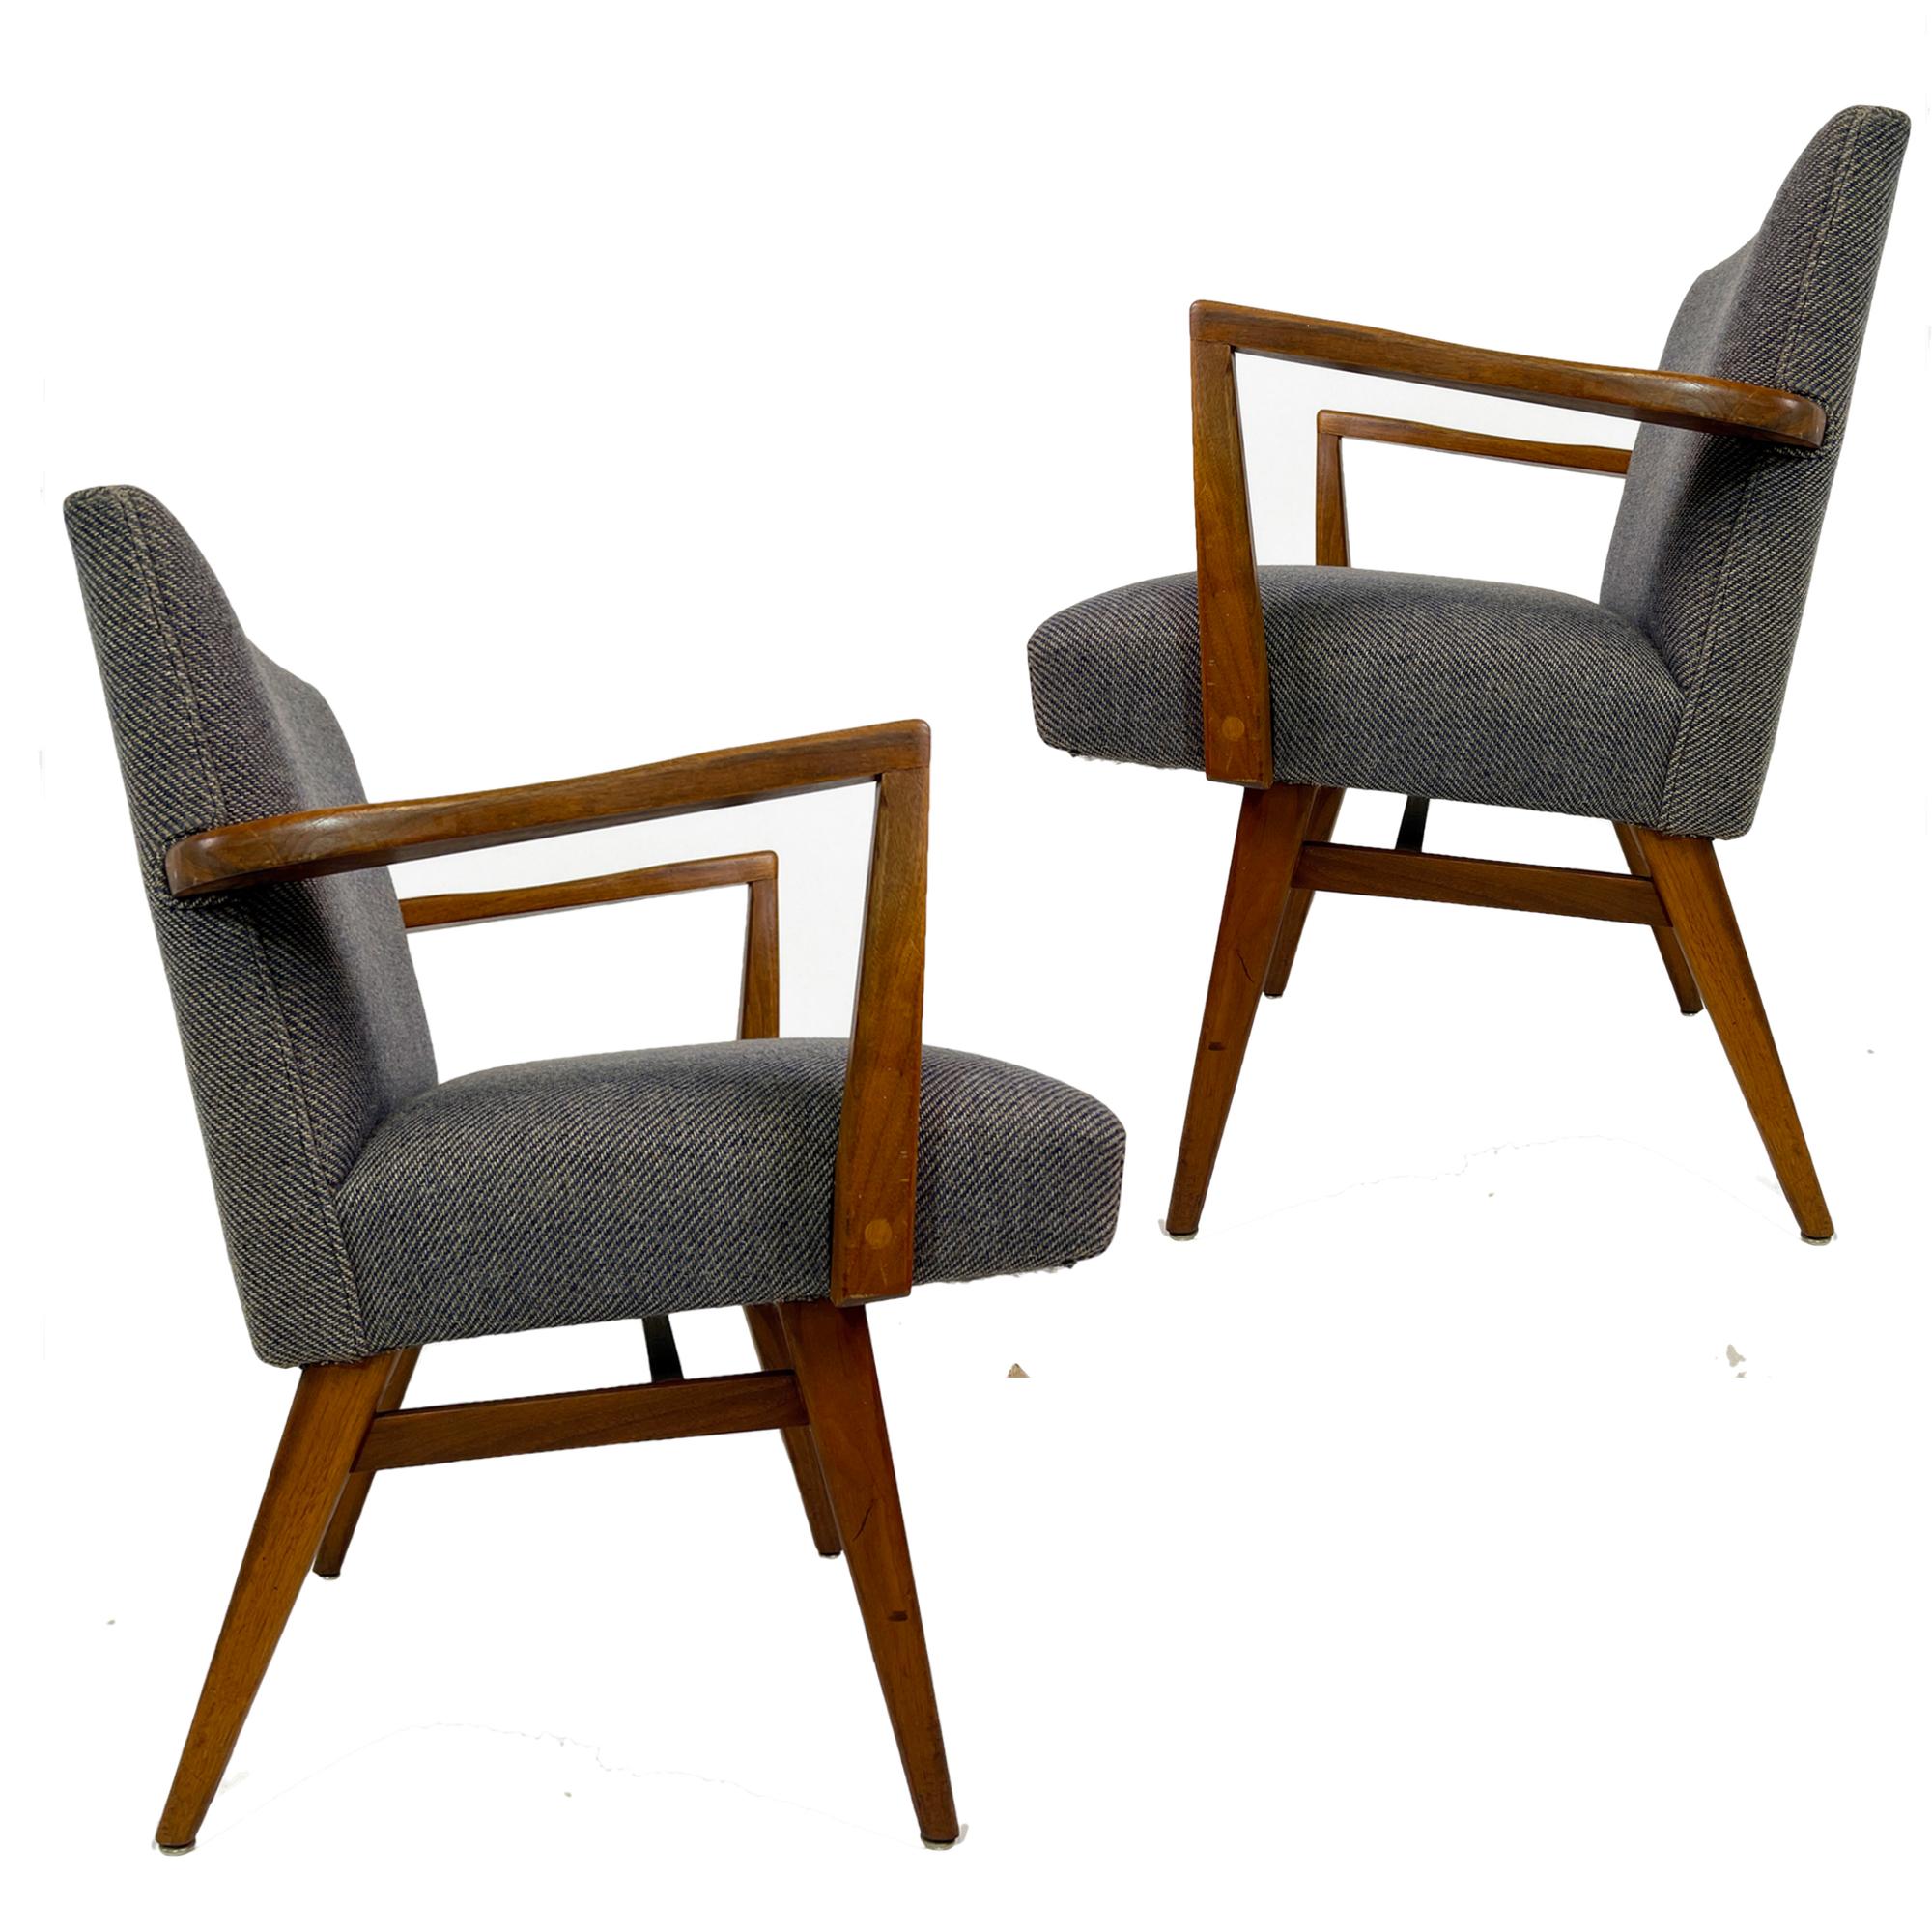 Pair of Jens Risom armchairs. model #205
This is a really great unique style in that the height and construction is styled to be either a dining chair, a desk chair, or can be used as occasional, or lounge chair. They are quite comfortable. These